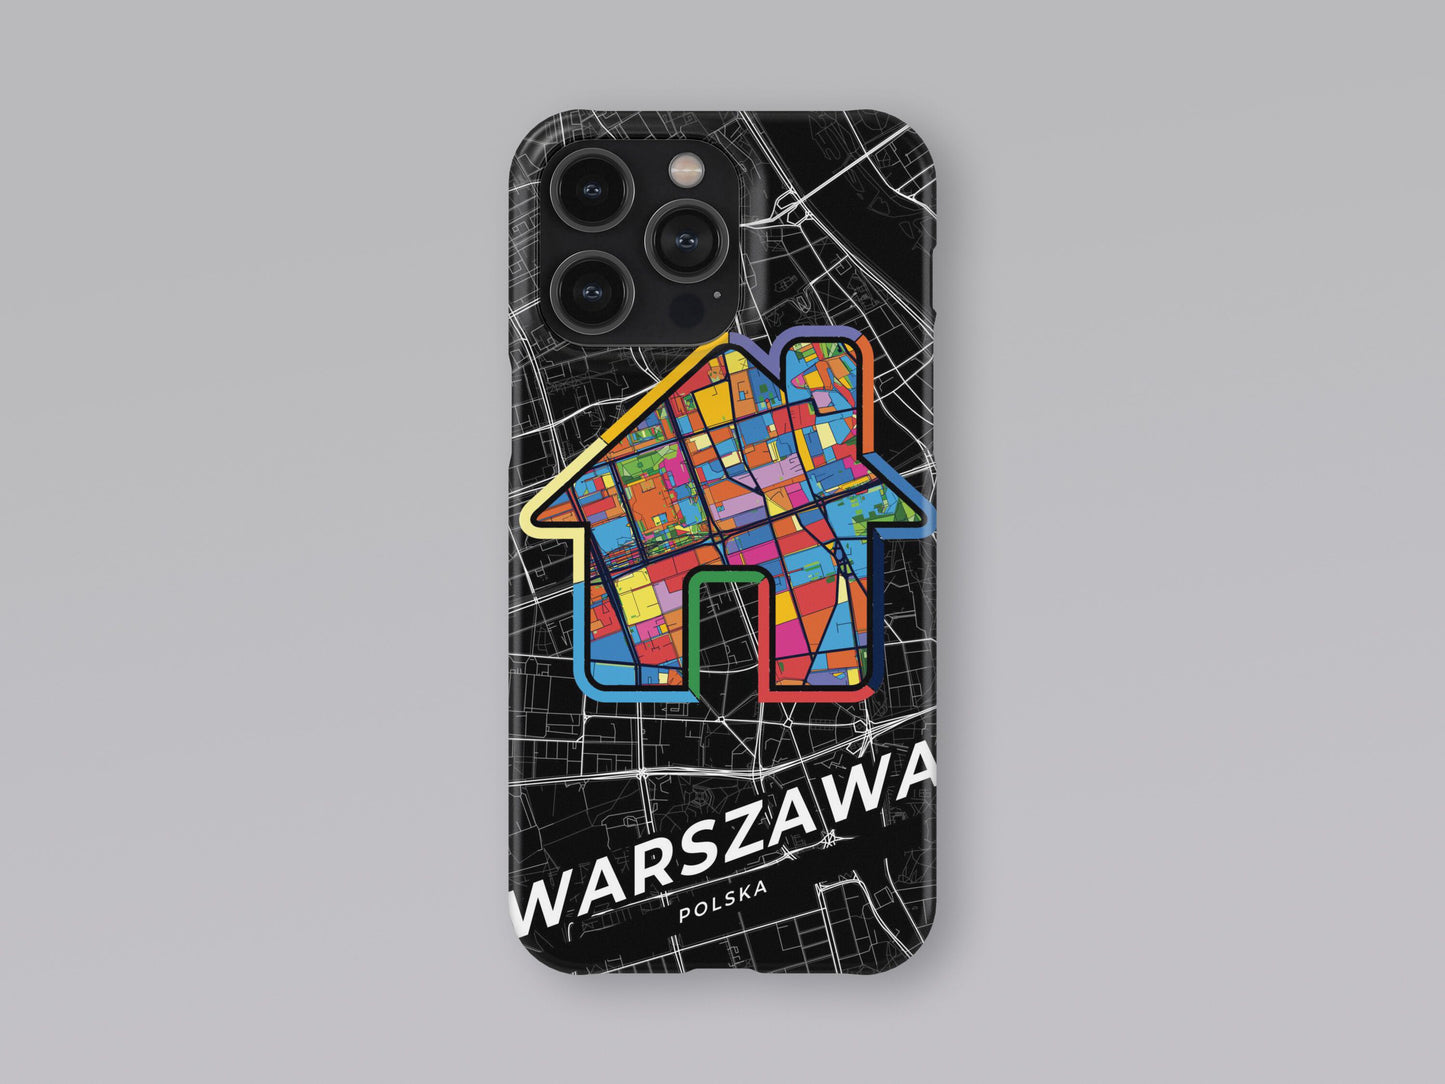 Warsaw Poland slim phone case with colorful icon 3